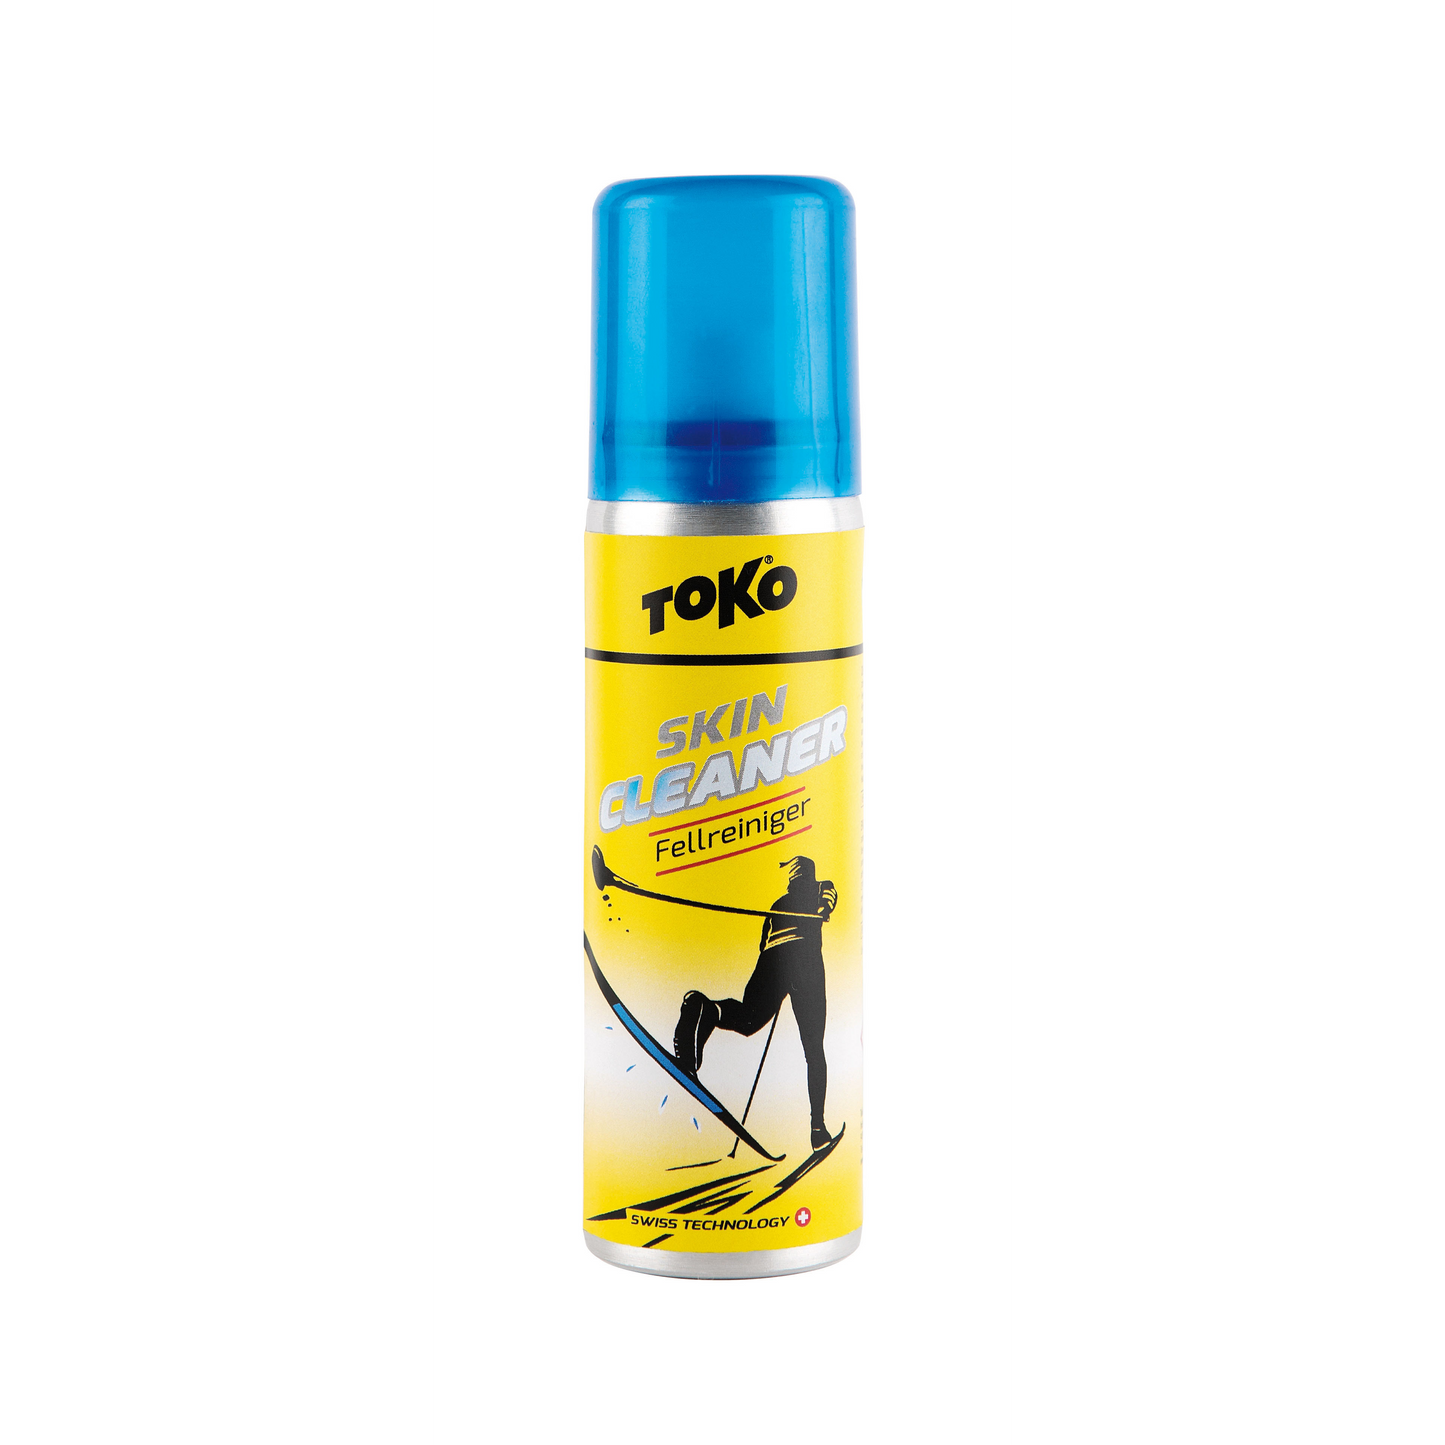 A product picture of the Toko Skin Cleaner